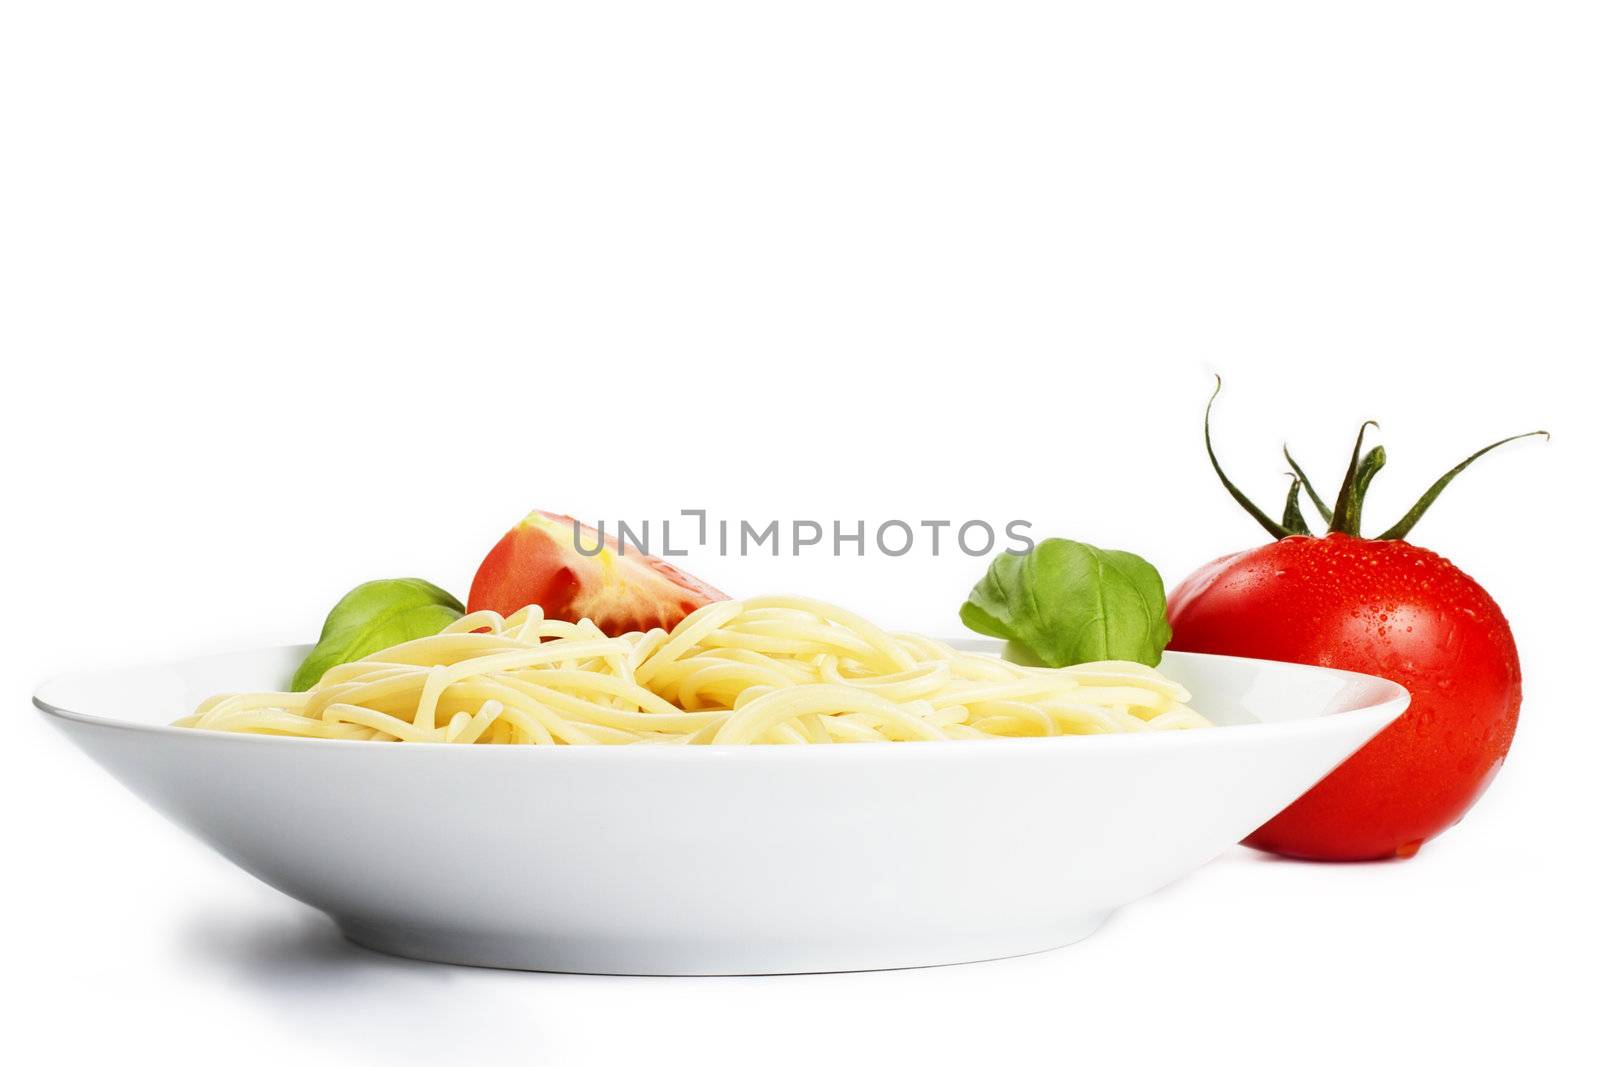 spaghetti in a plate with tomato and basil